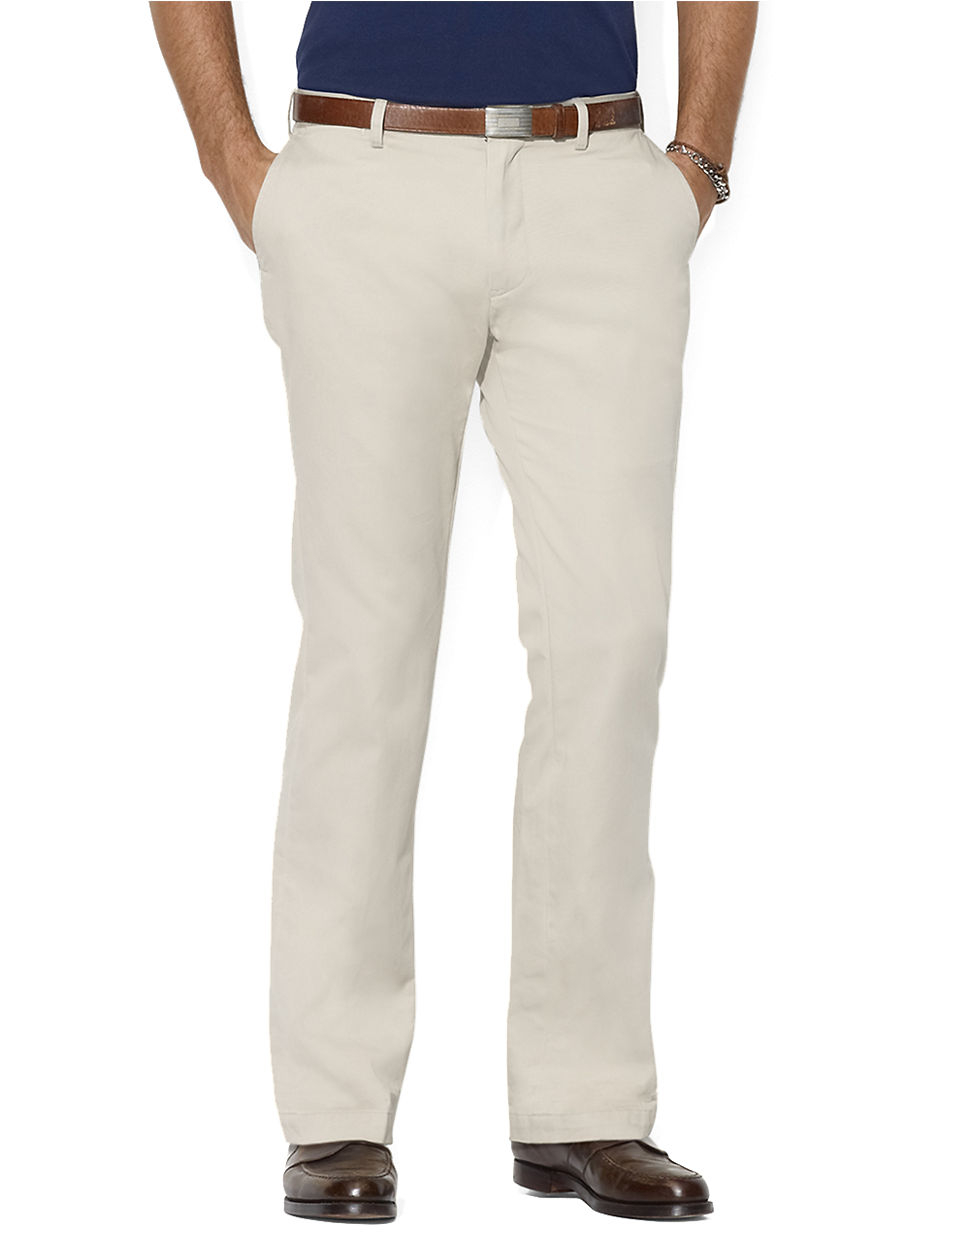 Polo ralph lauren Classic-fit Flat-front Chino Pants in Beige for Men ...